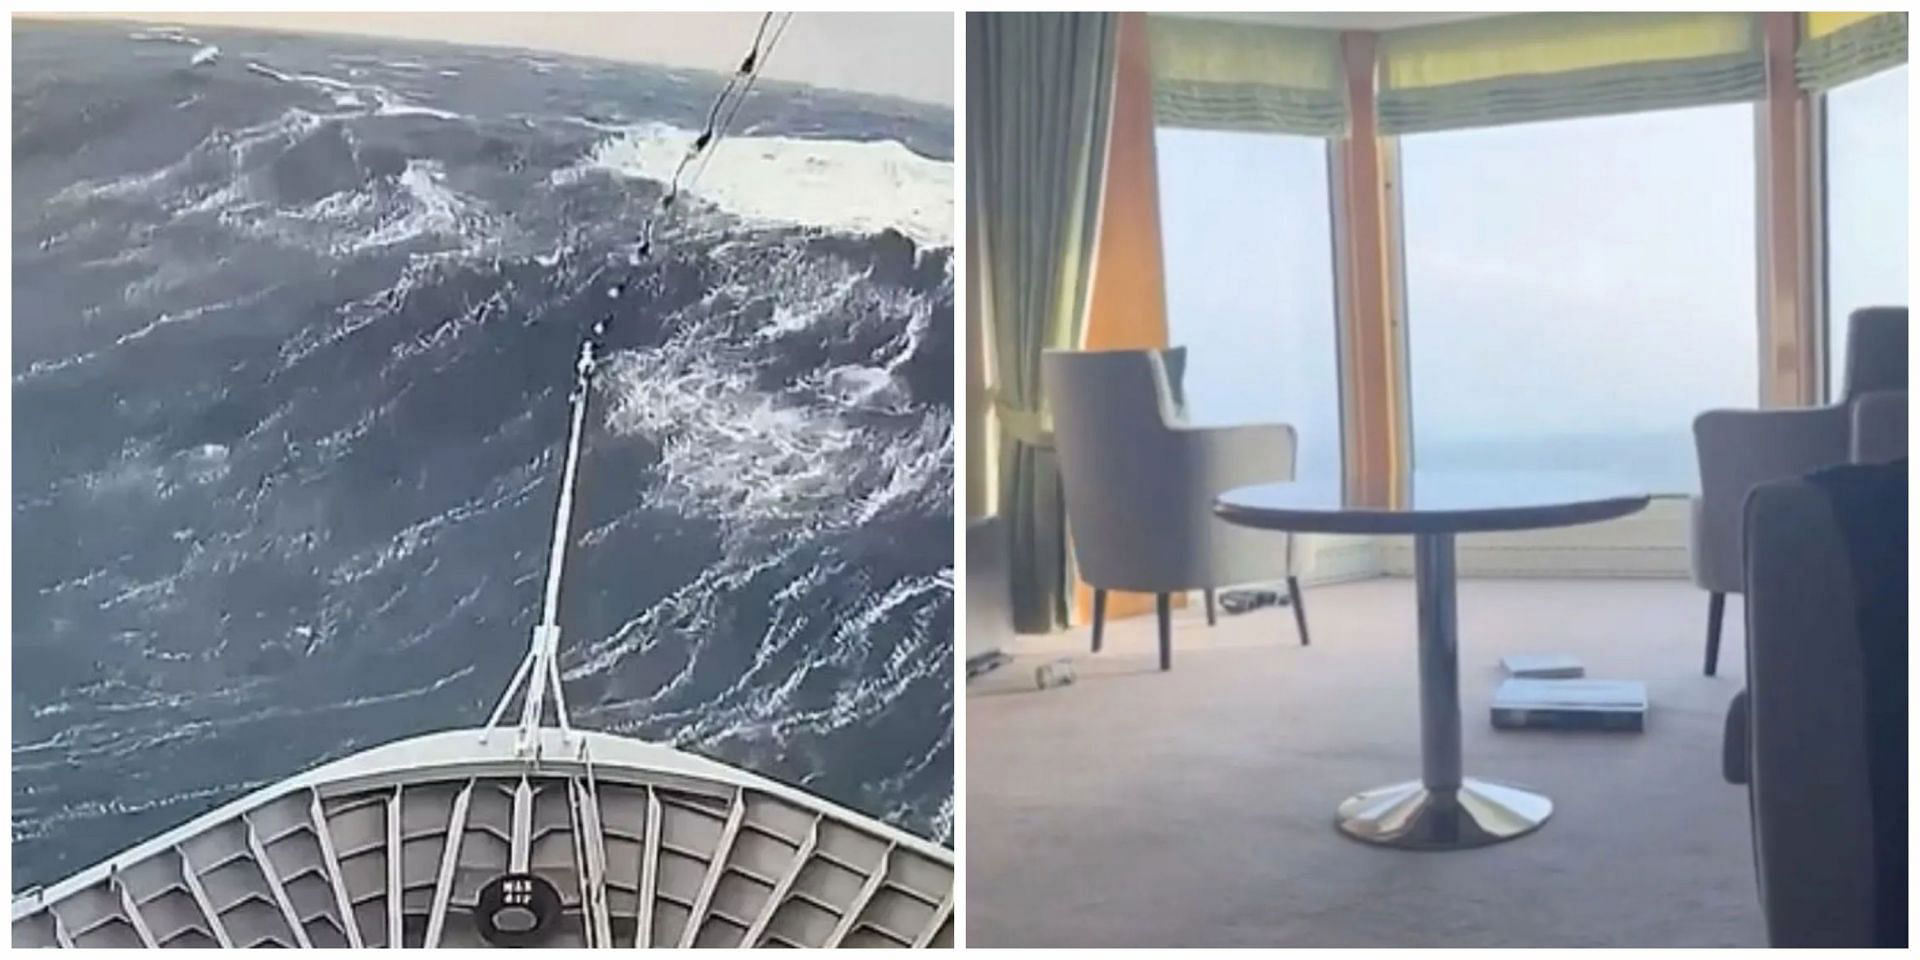 What happened to the MS Maud? Norwegian Cruise ship gets hit by Rogue